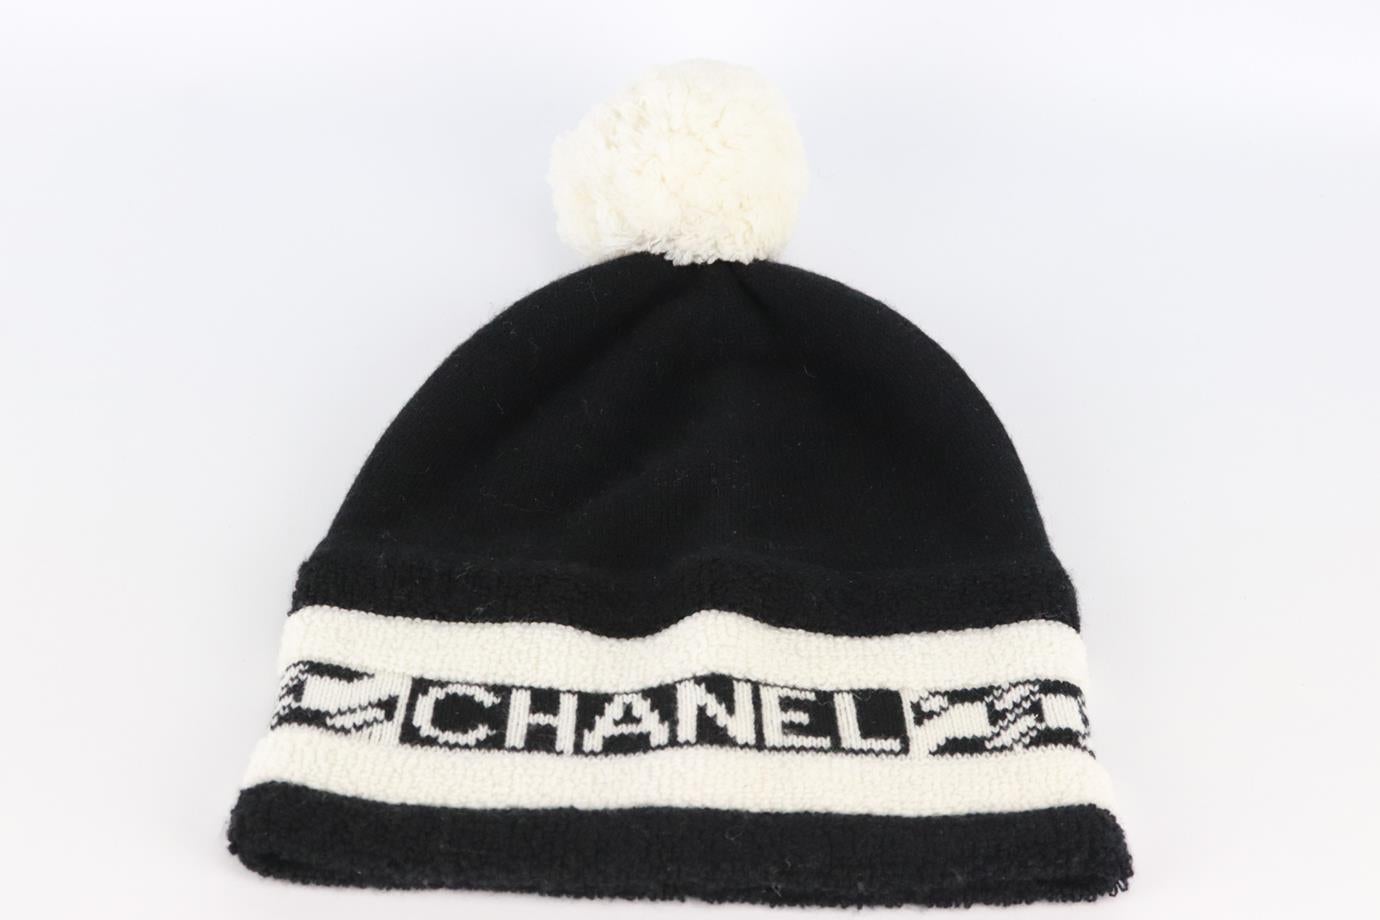 Chanel 2020 logo intarsia cashmere beanie. Black and white. Slips on. 100% Cashmere. Does not come with dustbag or box. Length: 10.5 in. Circumference: 20 in. Very good condition - No sign of wear; see pictures.